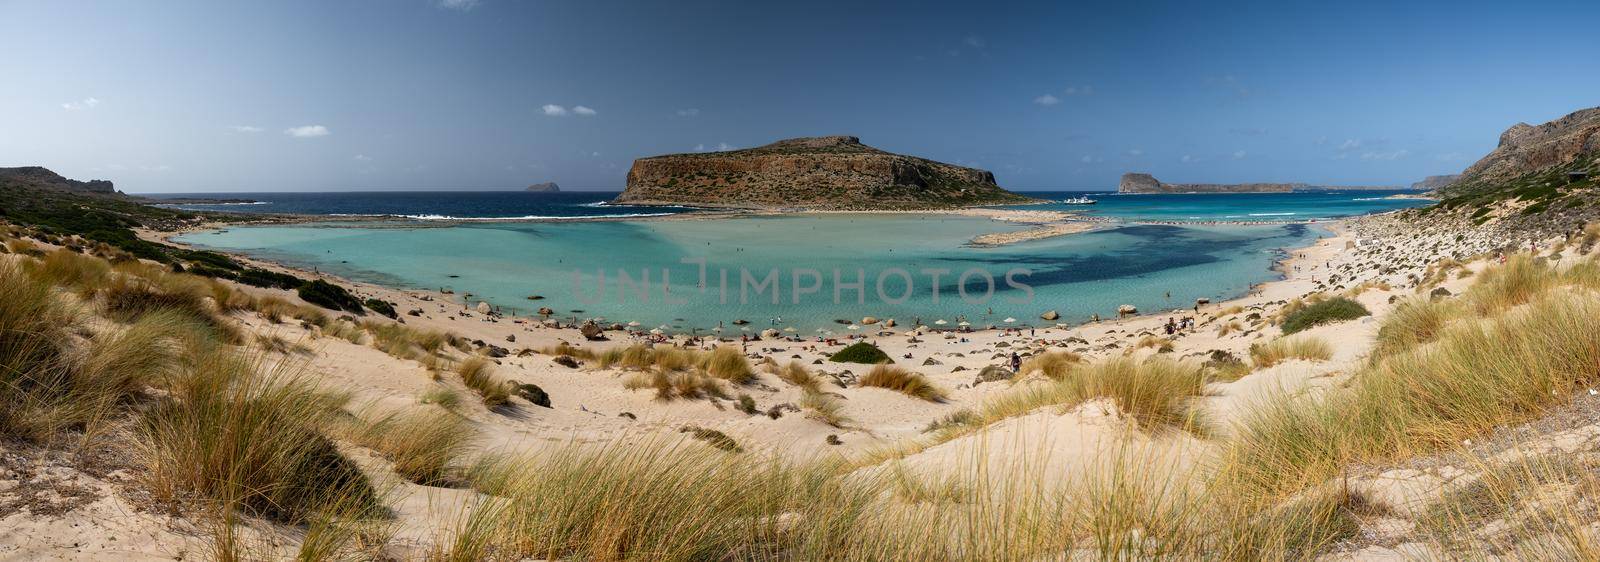 Crete Greece, Balos lagoon on Crete island, Greece. Tourists relax and bath in crystal clear water of Balos beach. by fokkebok